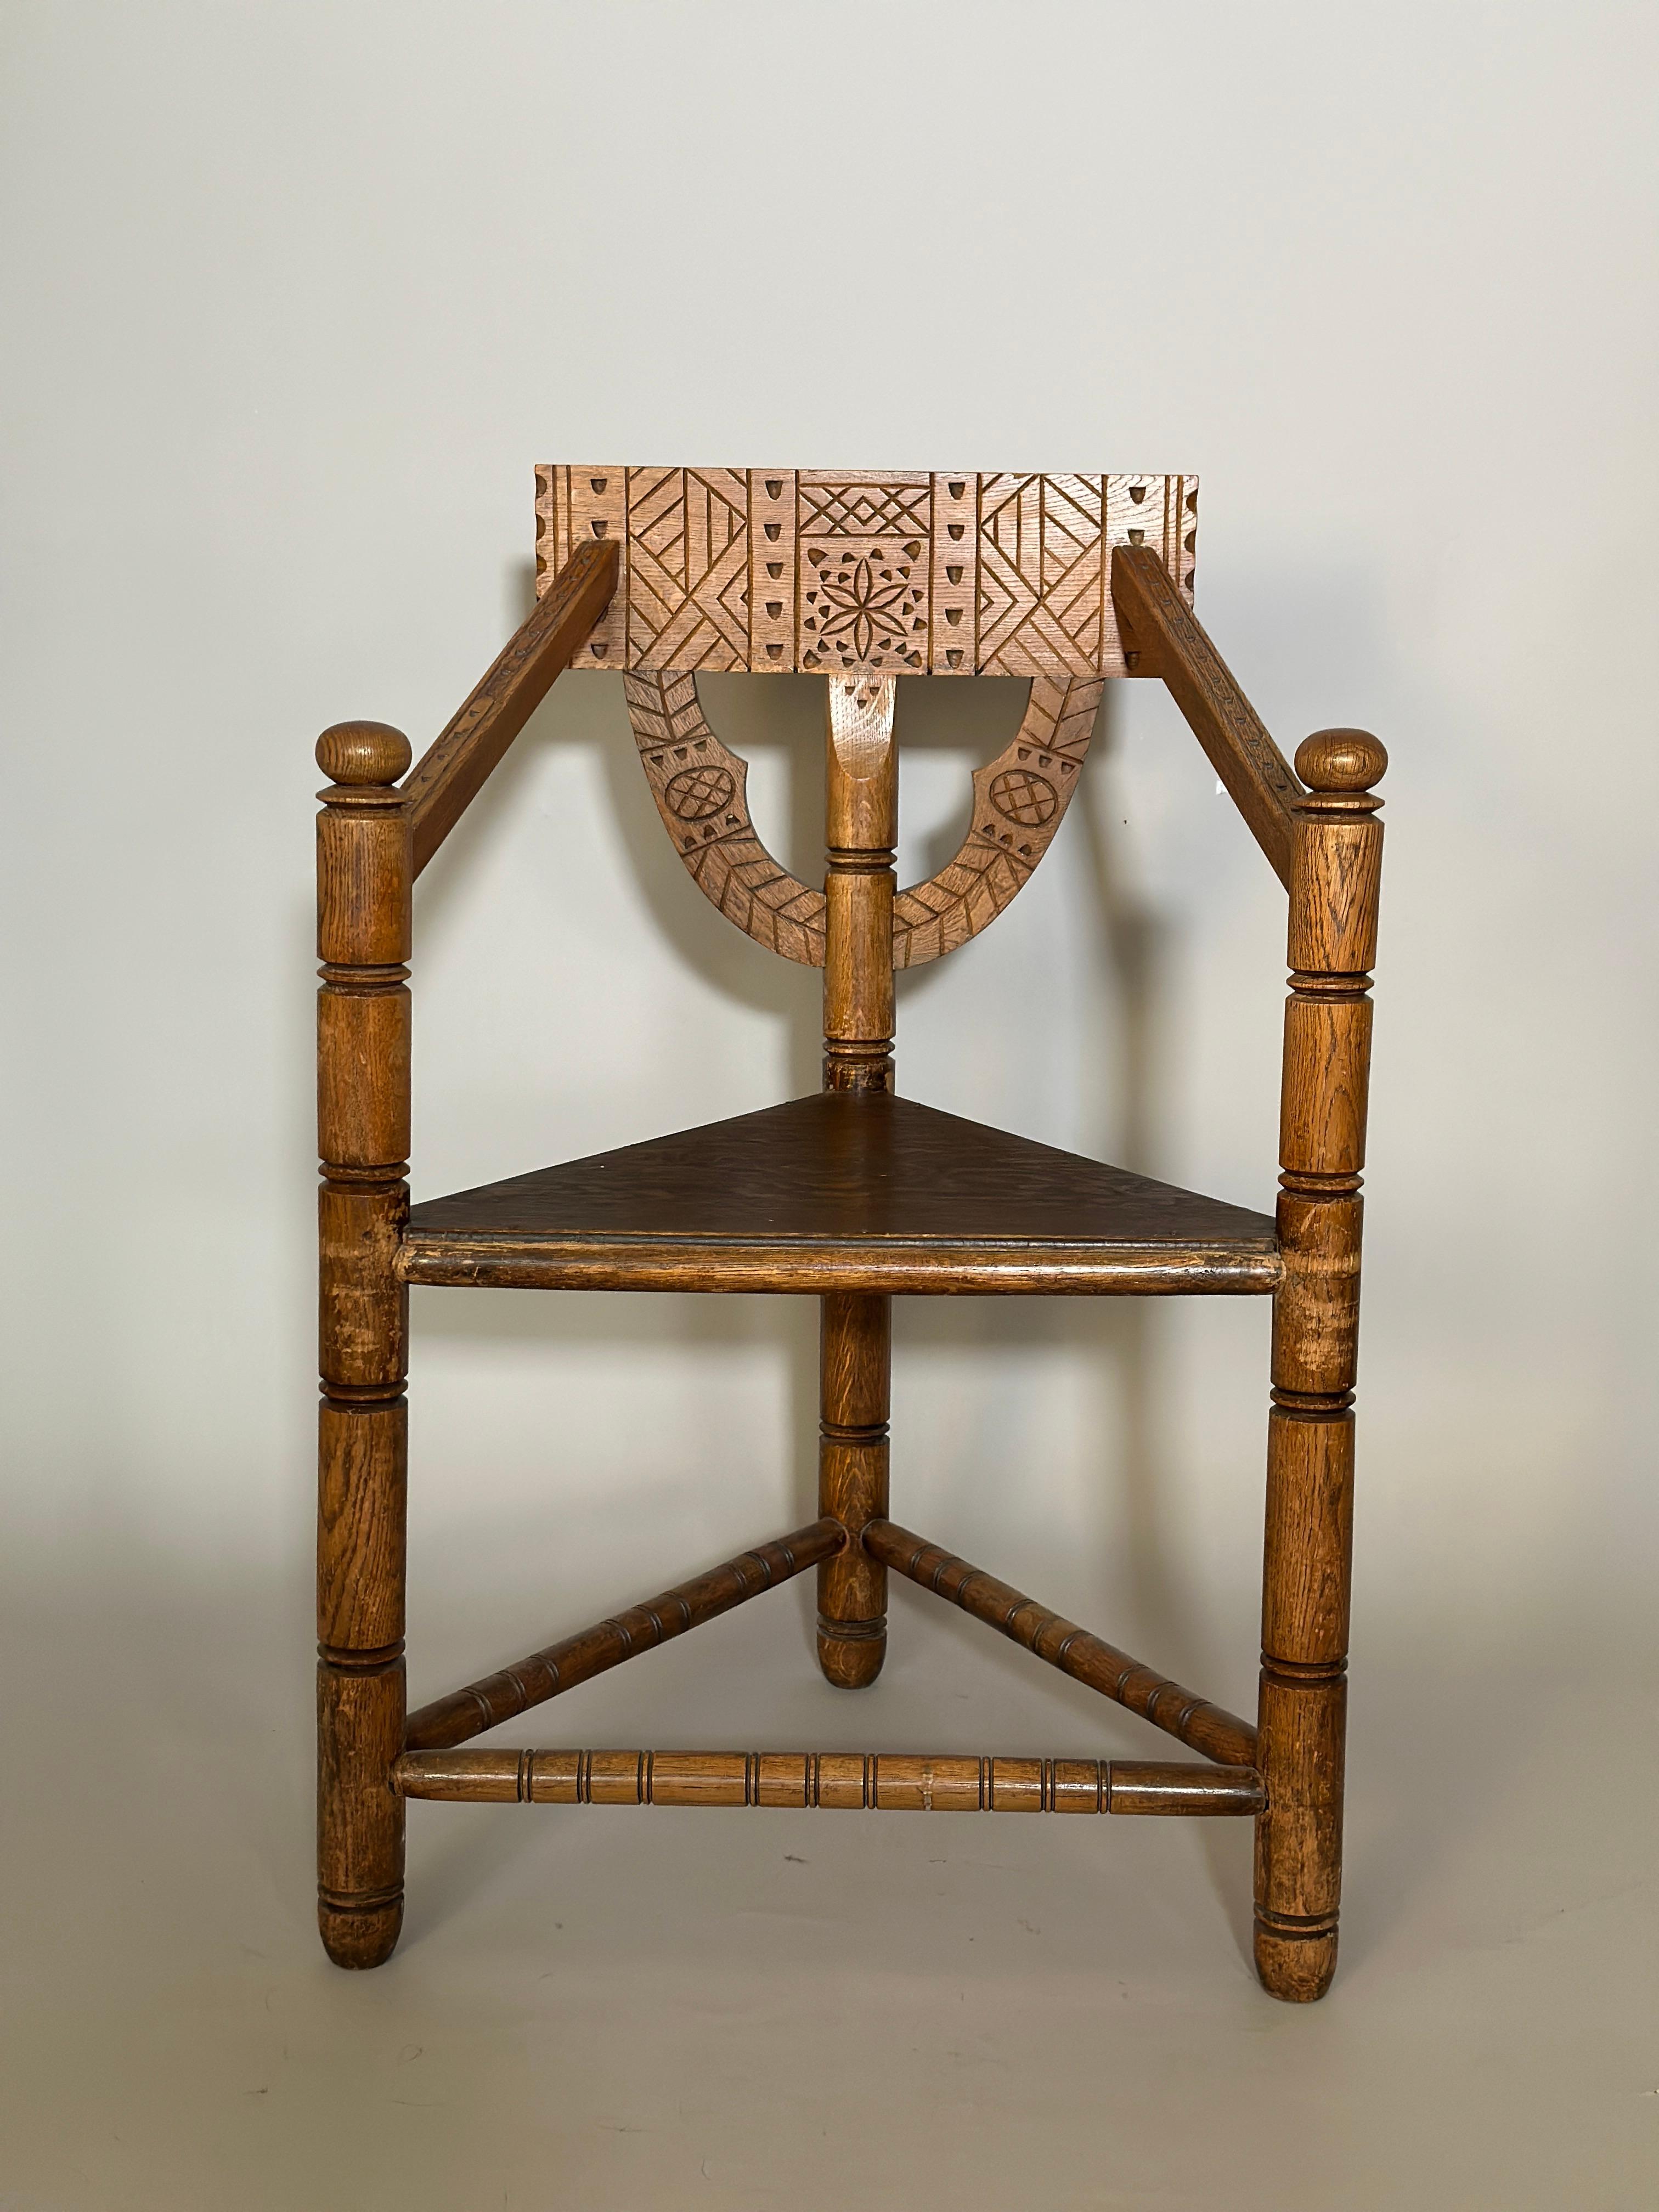 This is a handmade chair made in Sweden 1930s.Made of solid oak.